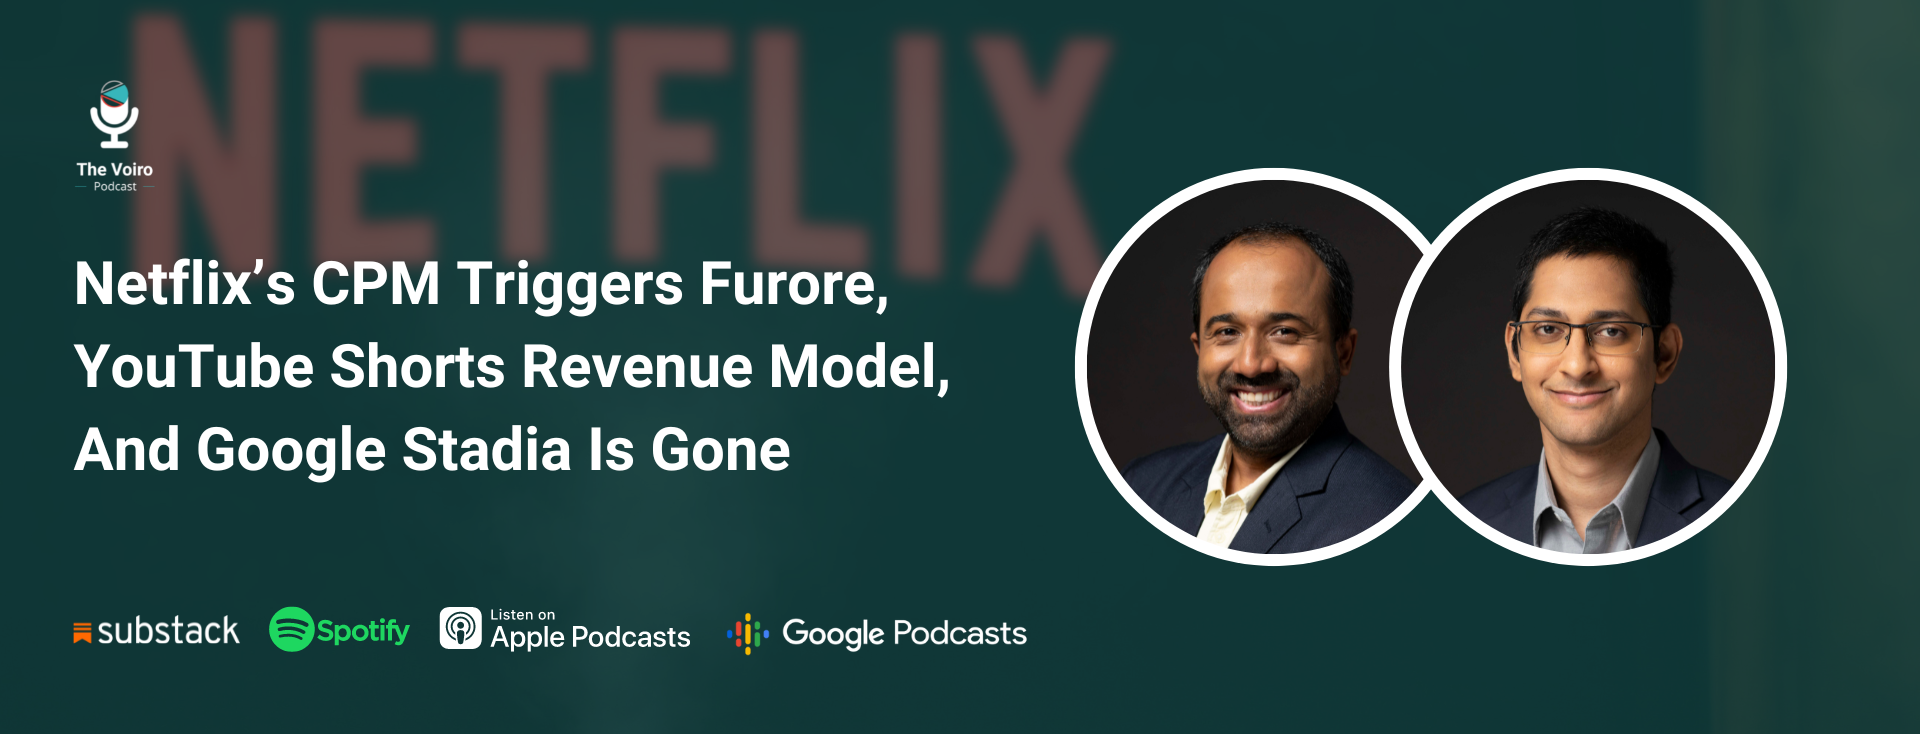 Netflix’s CPM Triggers Furore, YouTube Shorts Revenue Model, And Google Stadia Is Gone - The Voiro Podcast